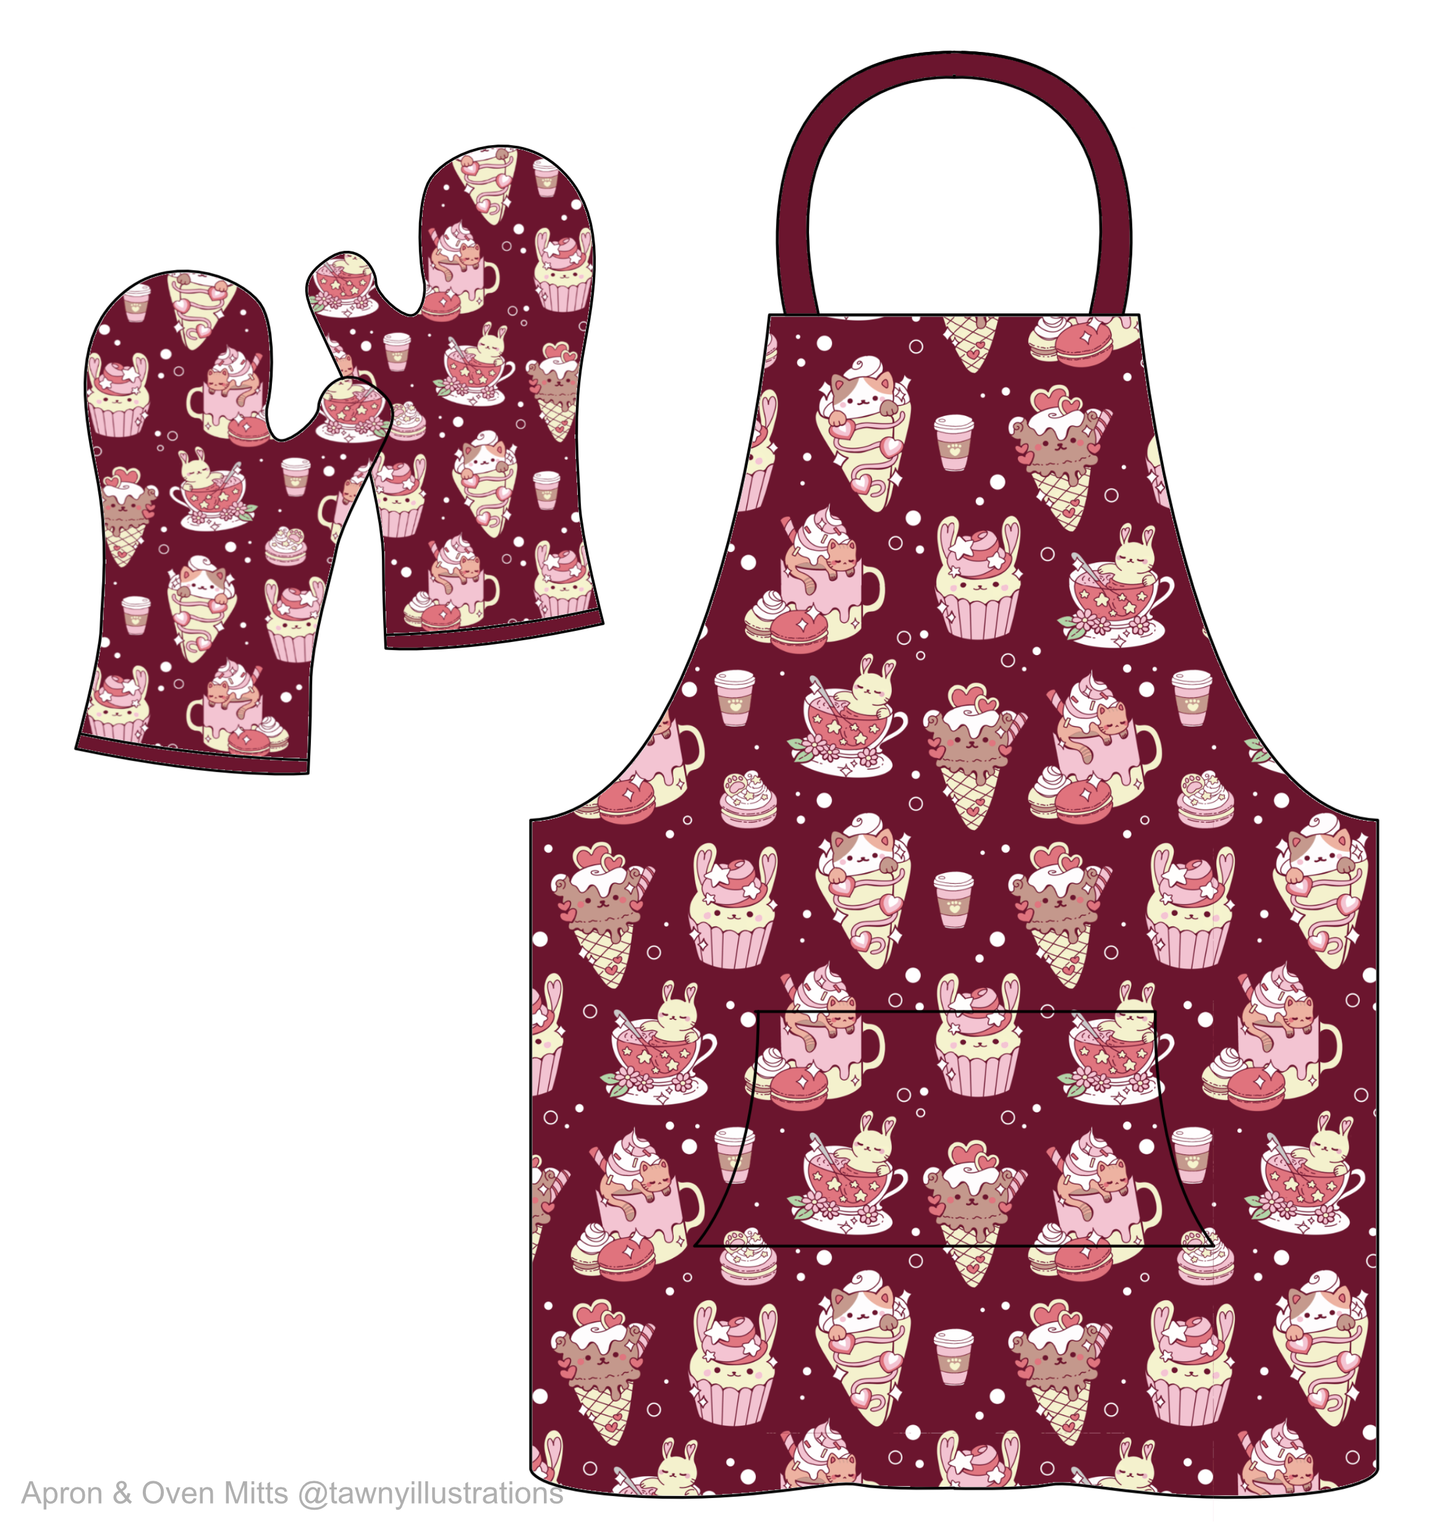 Cafe Apron and Baking Mitts Set